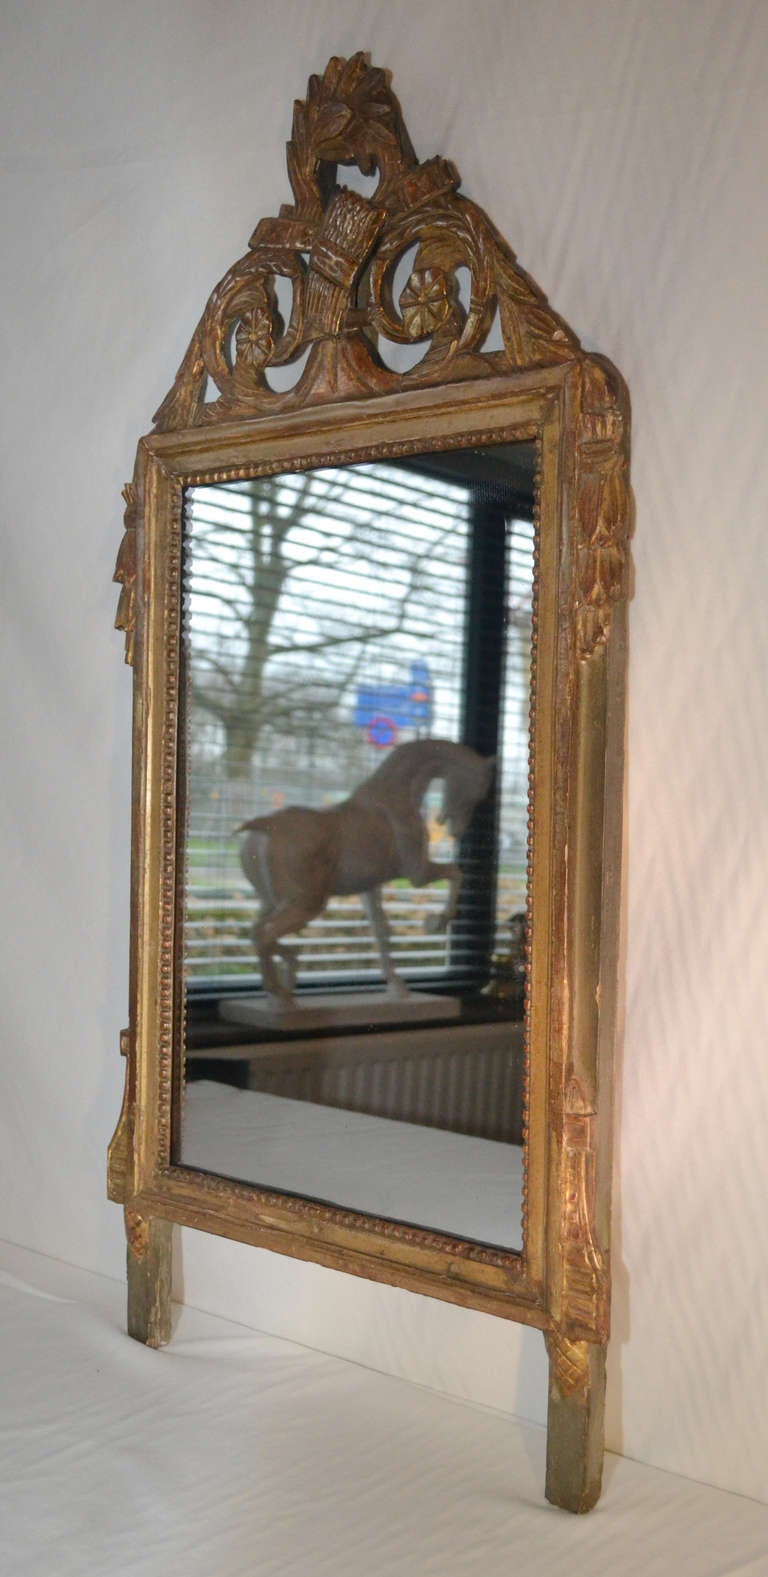 Woodcarved and gilded mirror.